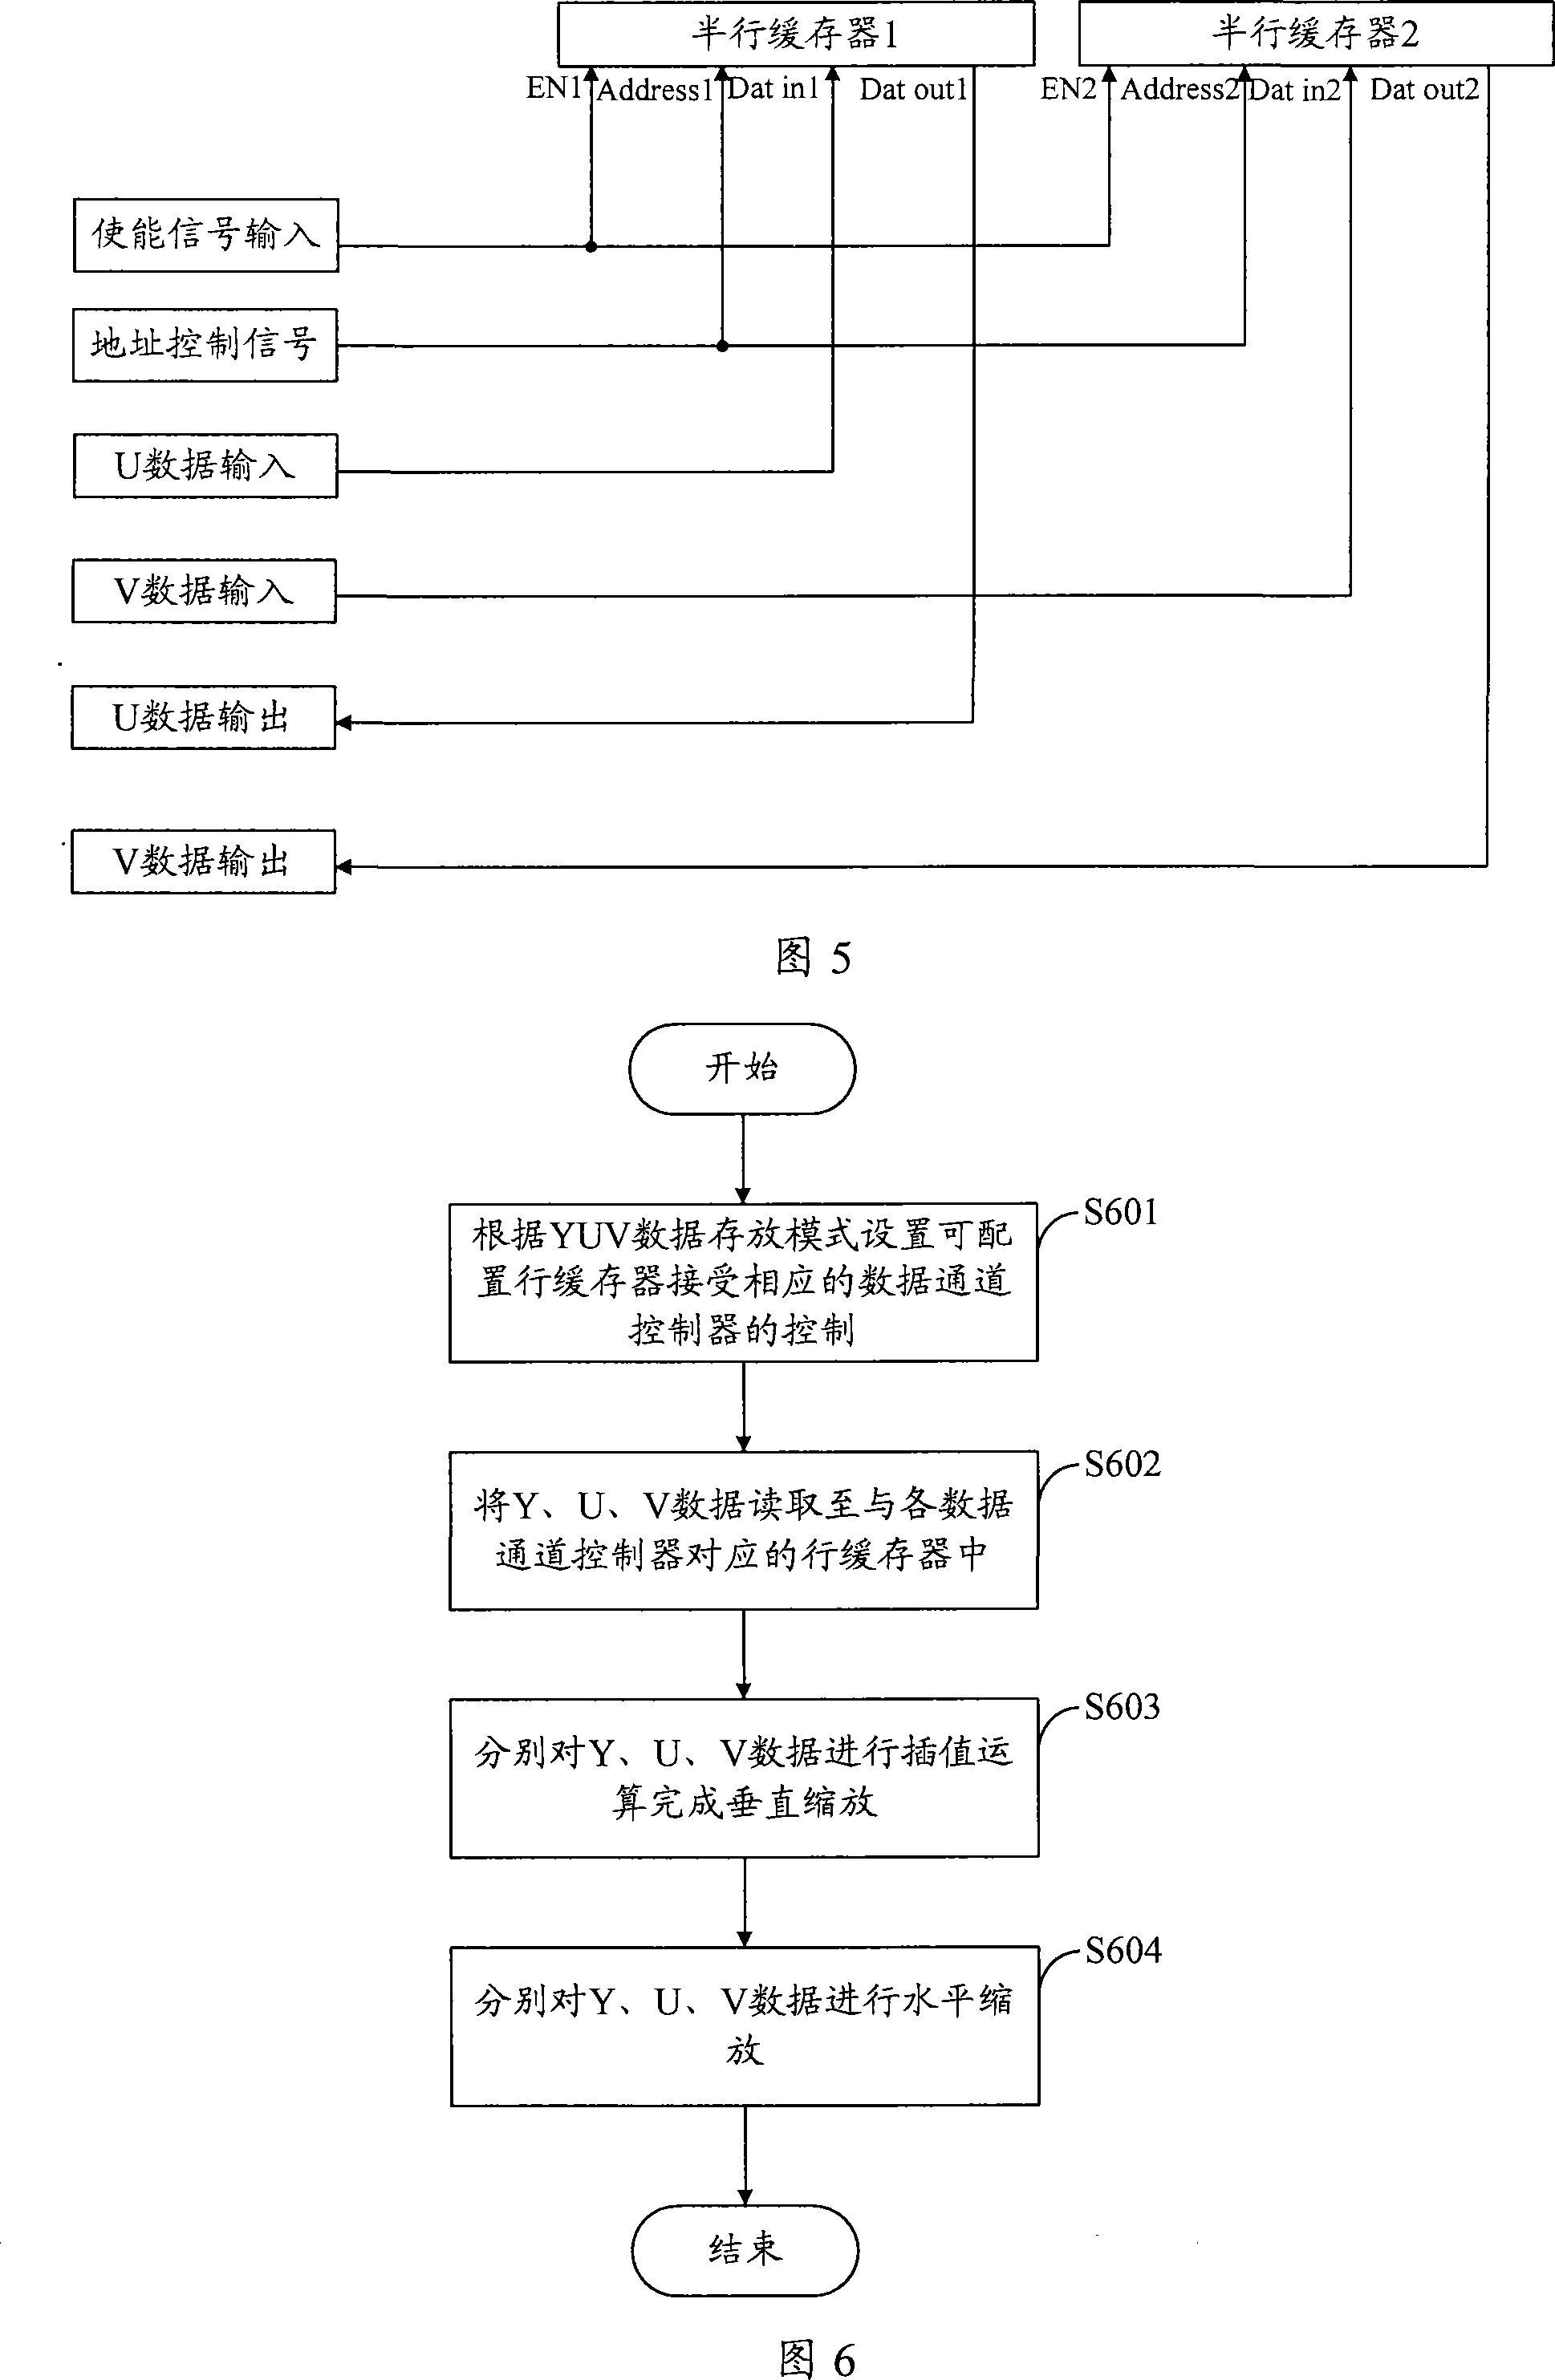 Image scaling device, method and image display device